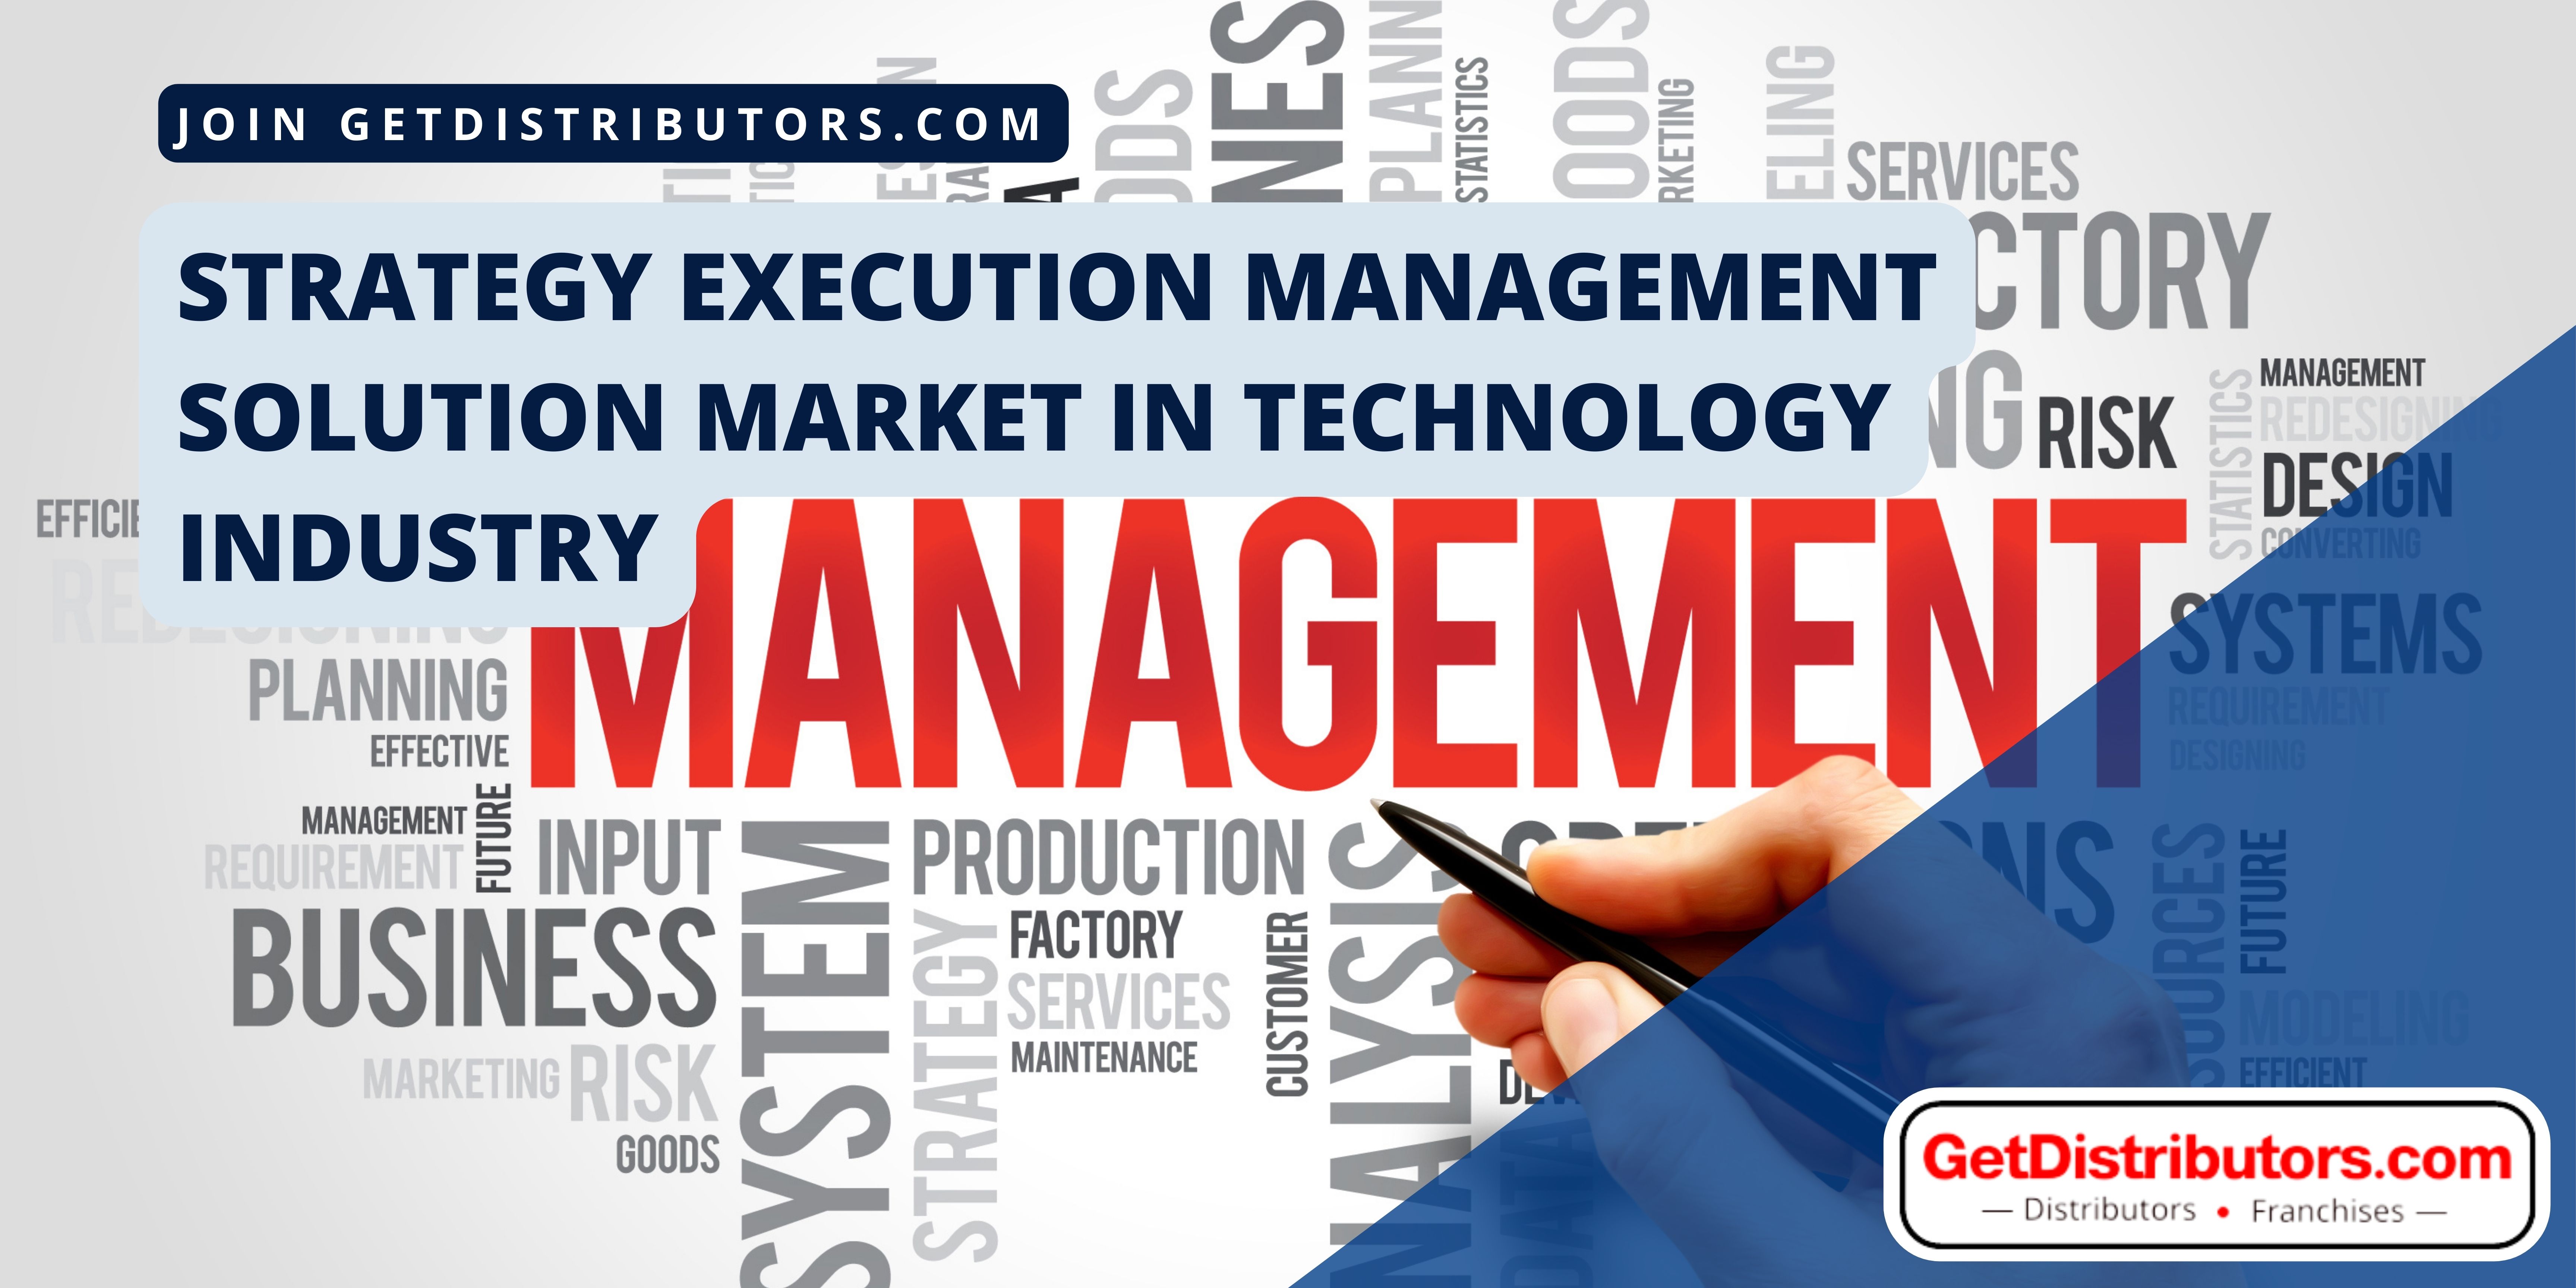 Strategy Execution Management Solution Market in Technology Industry